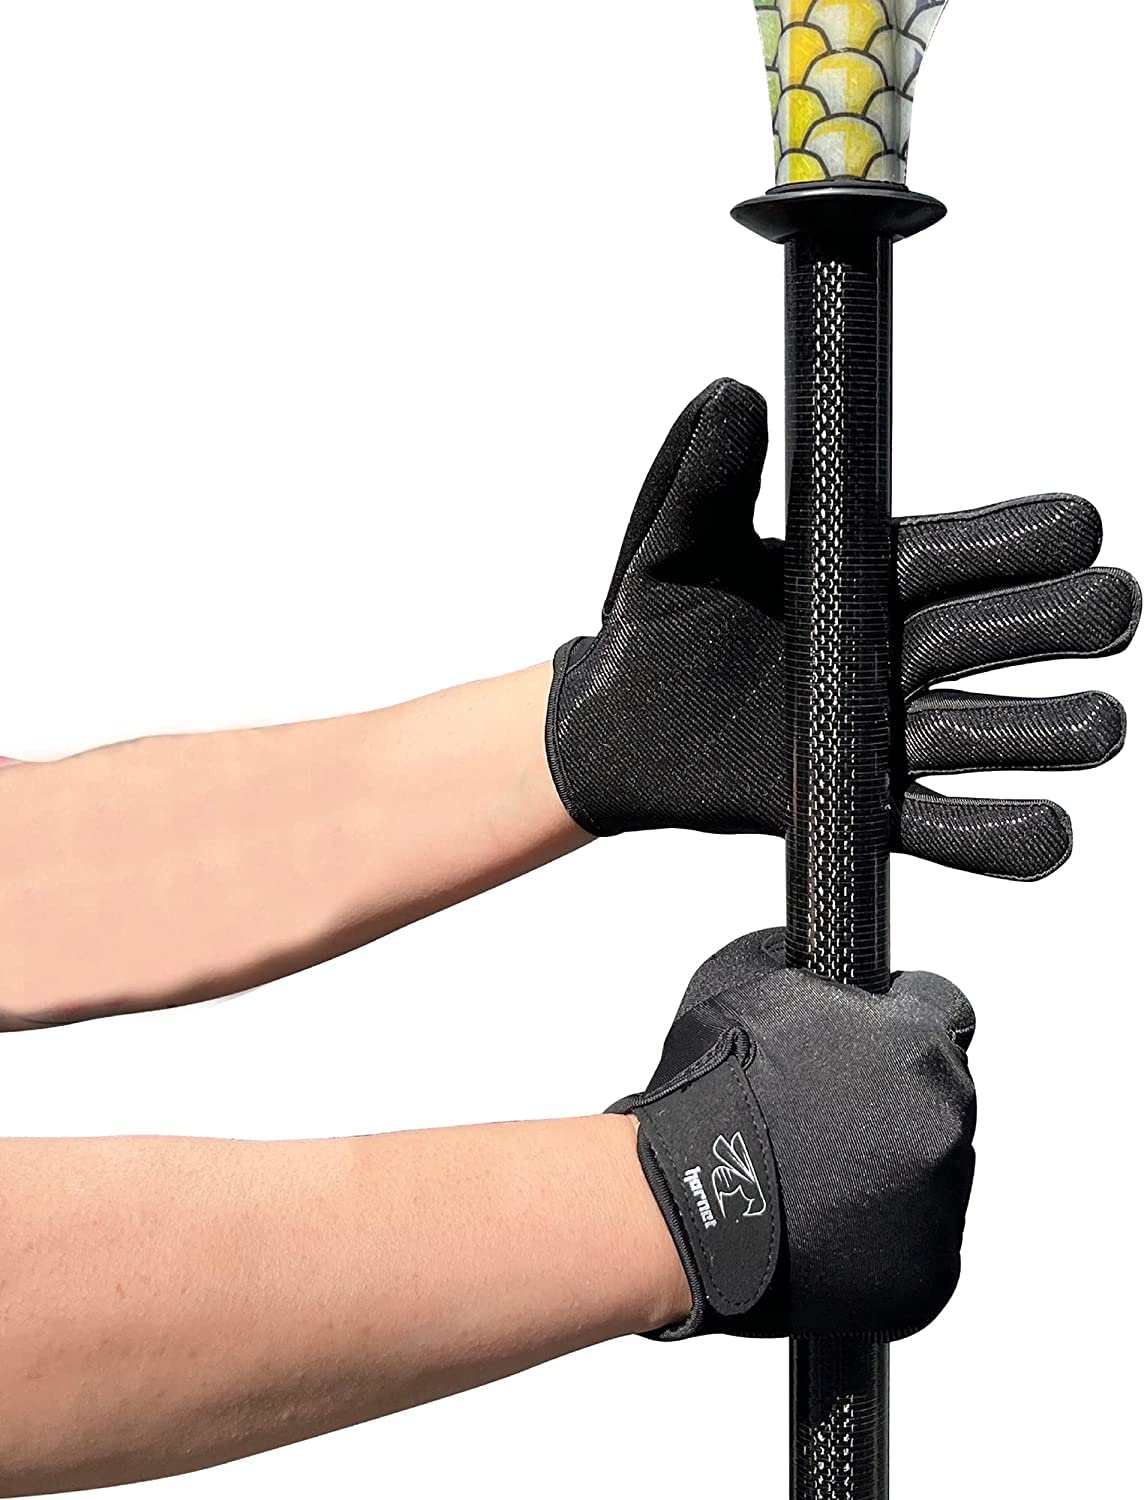 Kayak Gloves - Full Finger Black Rowing Gloves with Anti Slip Palm- Ideal for Kayaking, Paddling, Sculling, Fishing, Watersports, Sailing, Jet Ski and More. for Men and Women